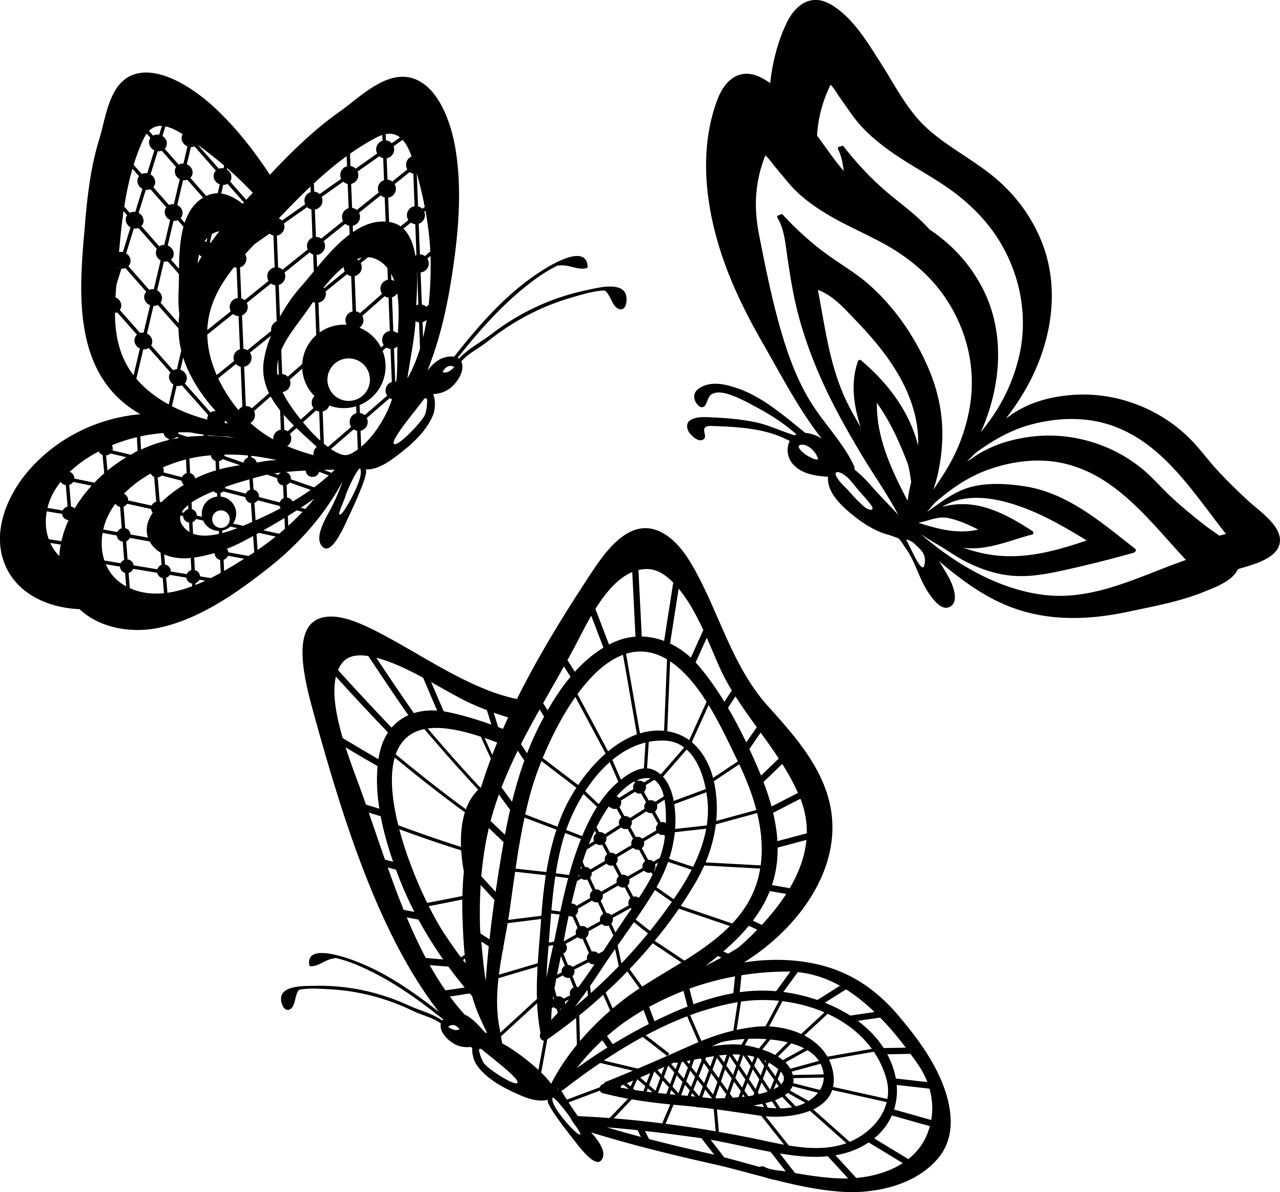 Masha S  Fine Line Tattoo  New York on Instagram Hip butterflies tattoo  in Fine Line Delicate  thin style  the best for the first tattoo  experience Your trust is always much